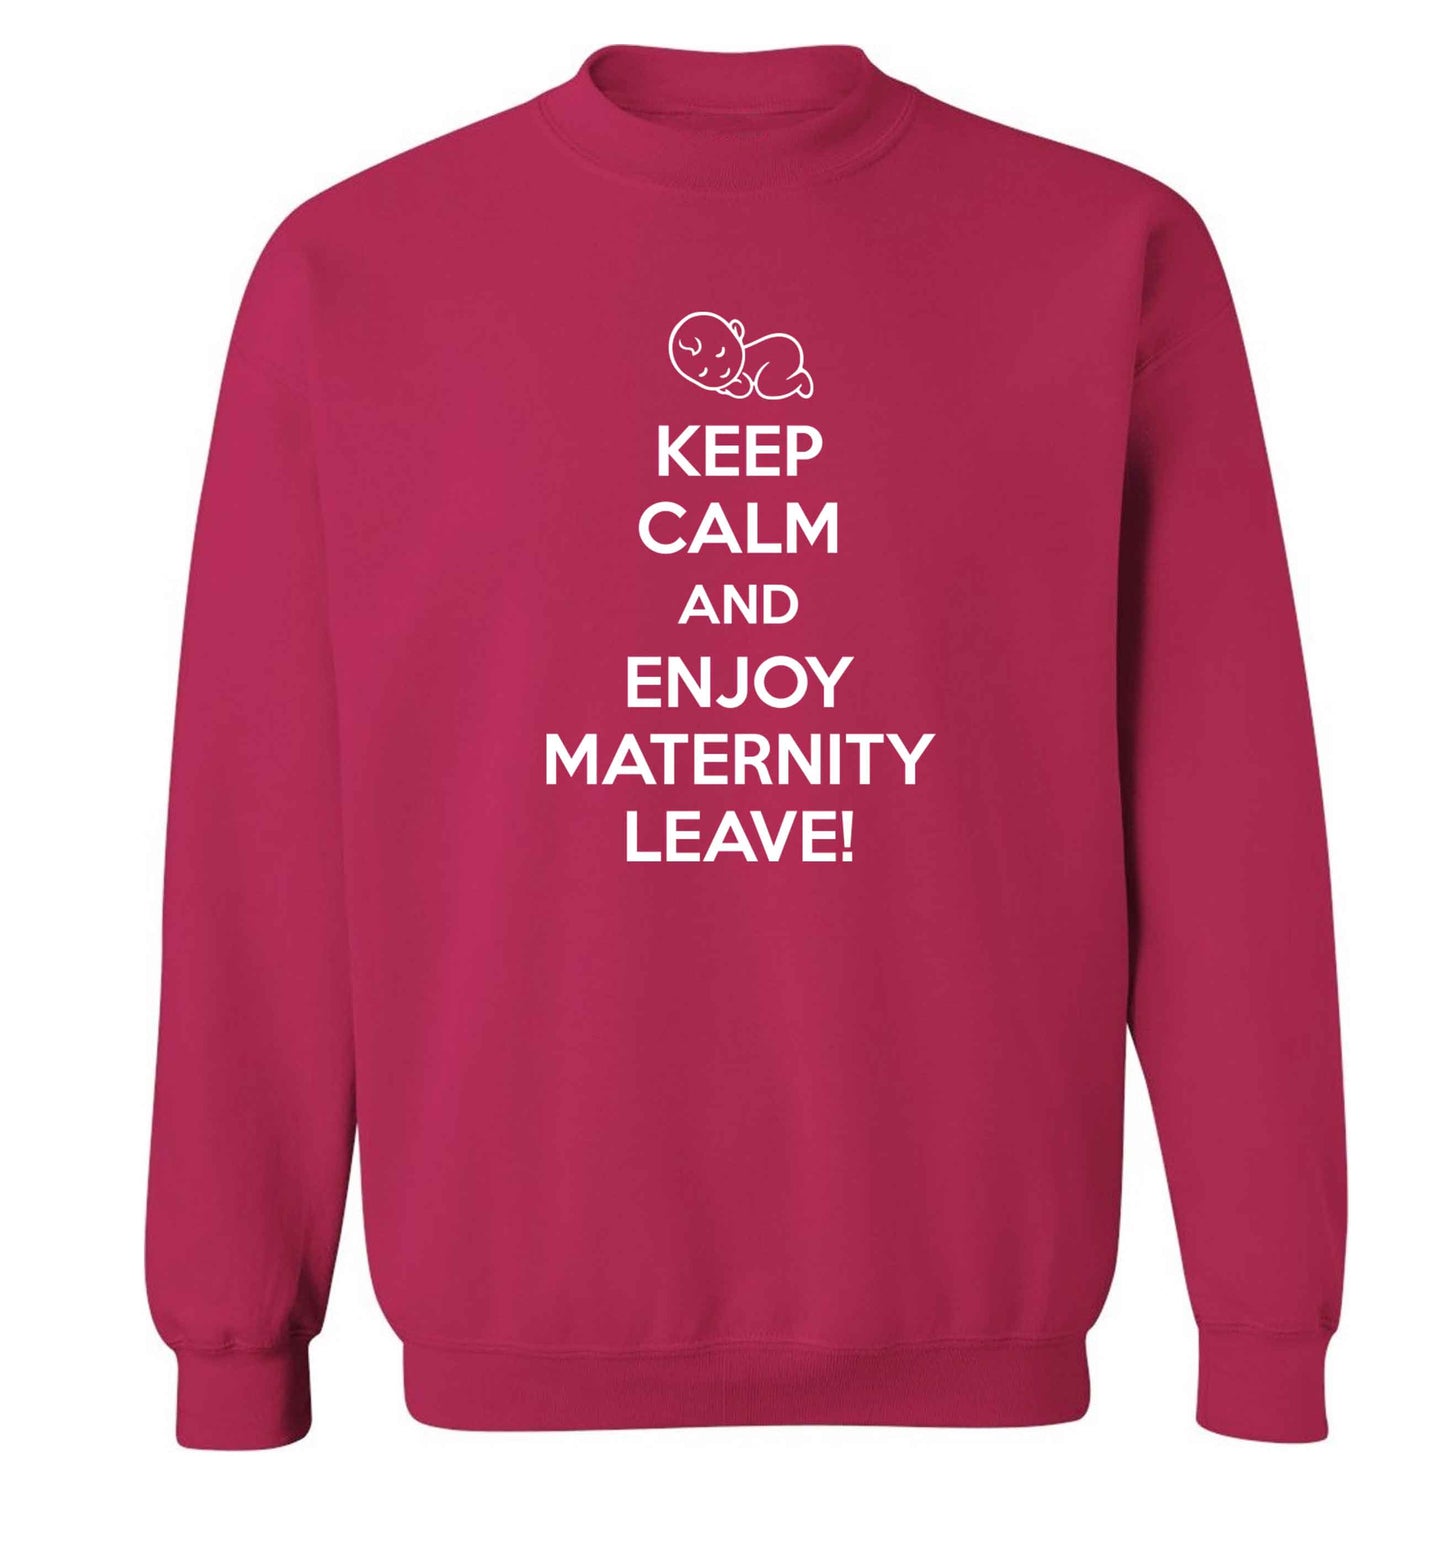 Keep calm and enjoy maternity leave Adult's unisex pink Sweater 2XL